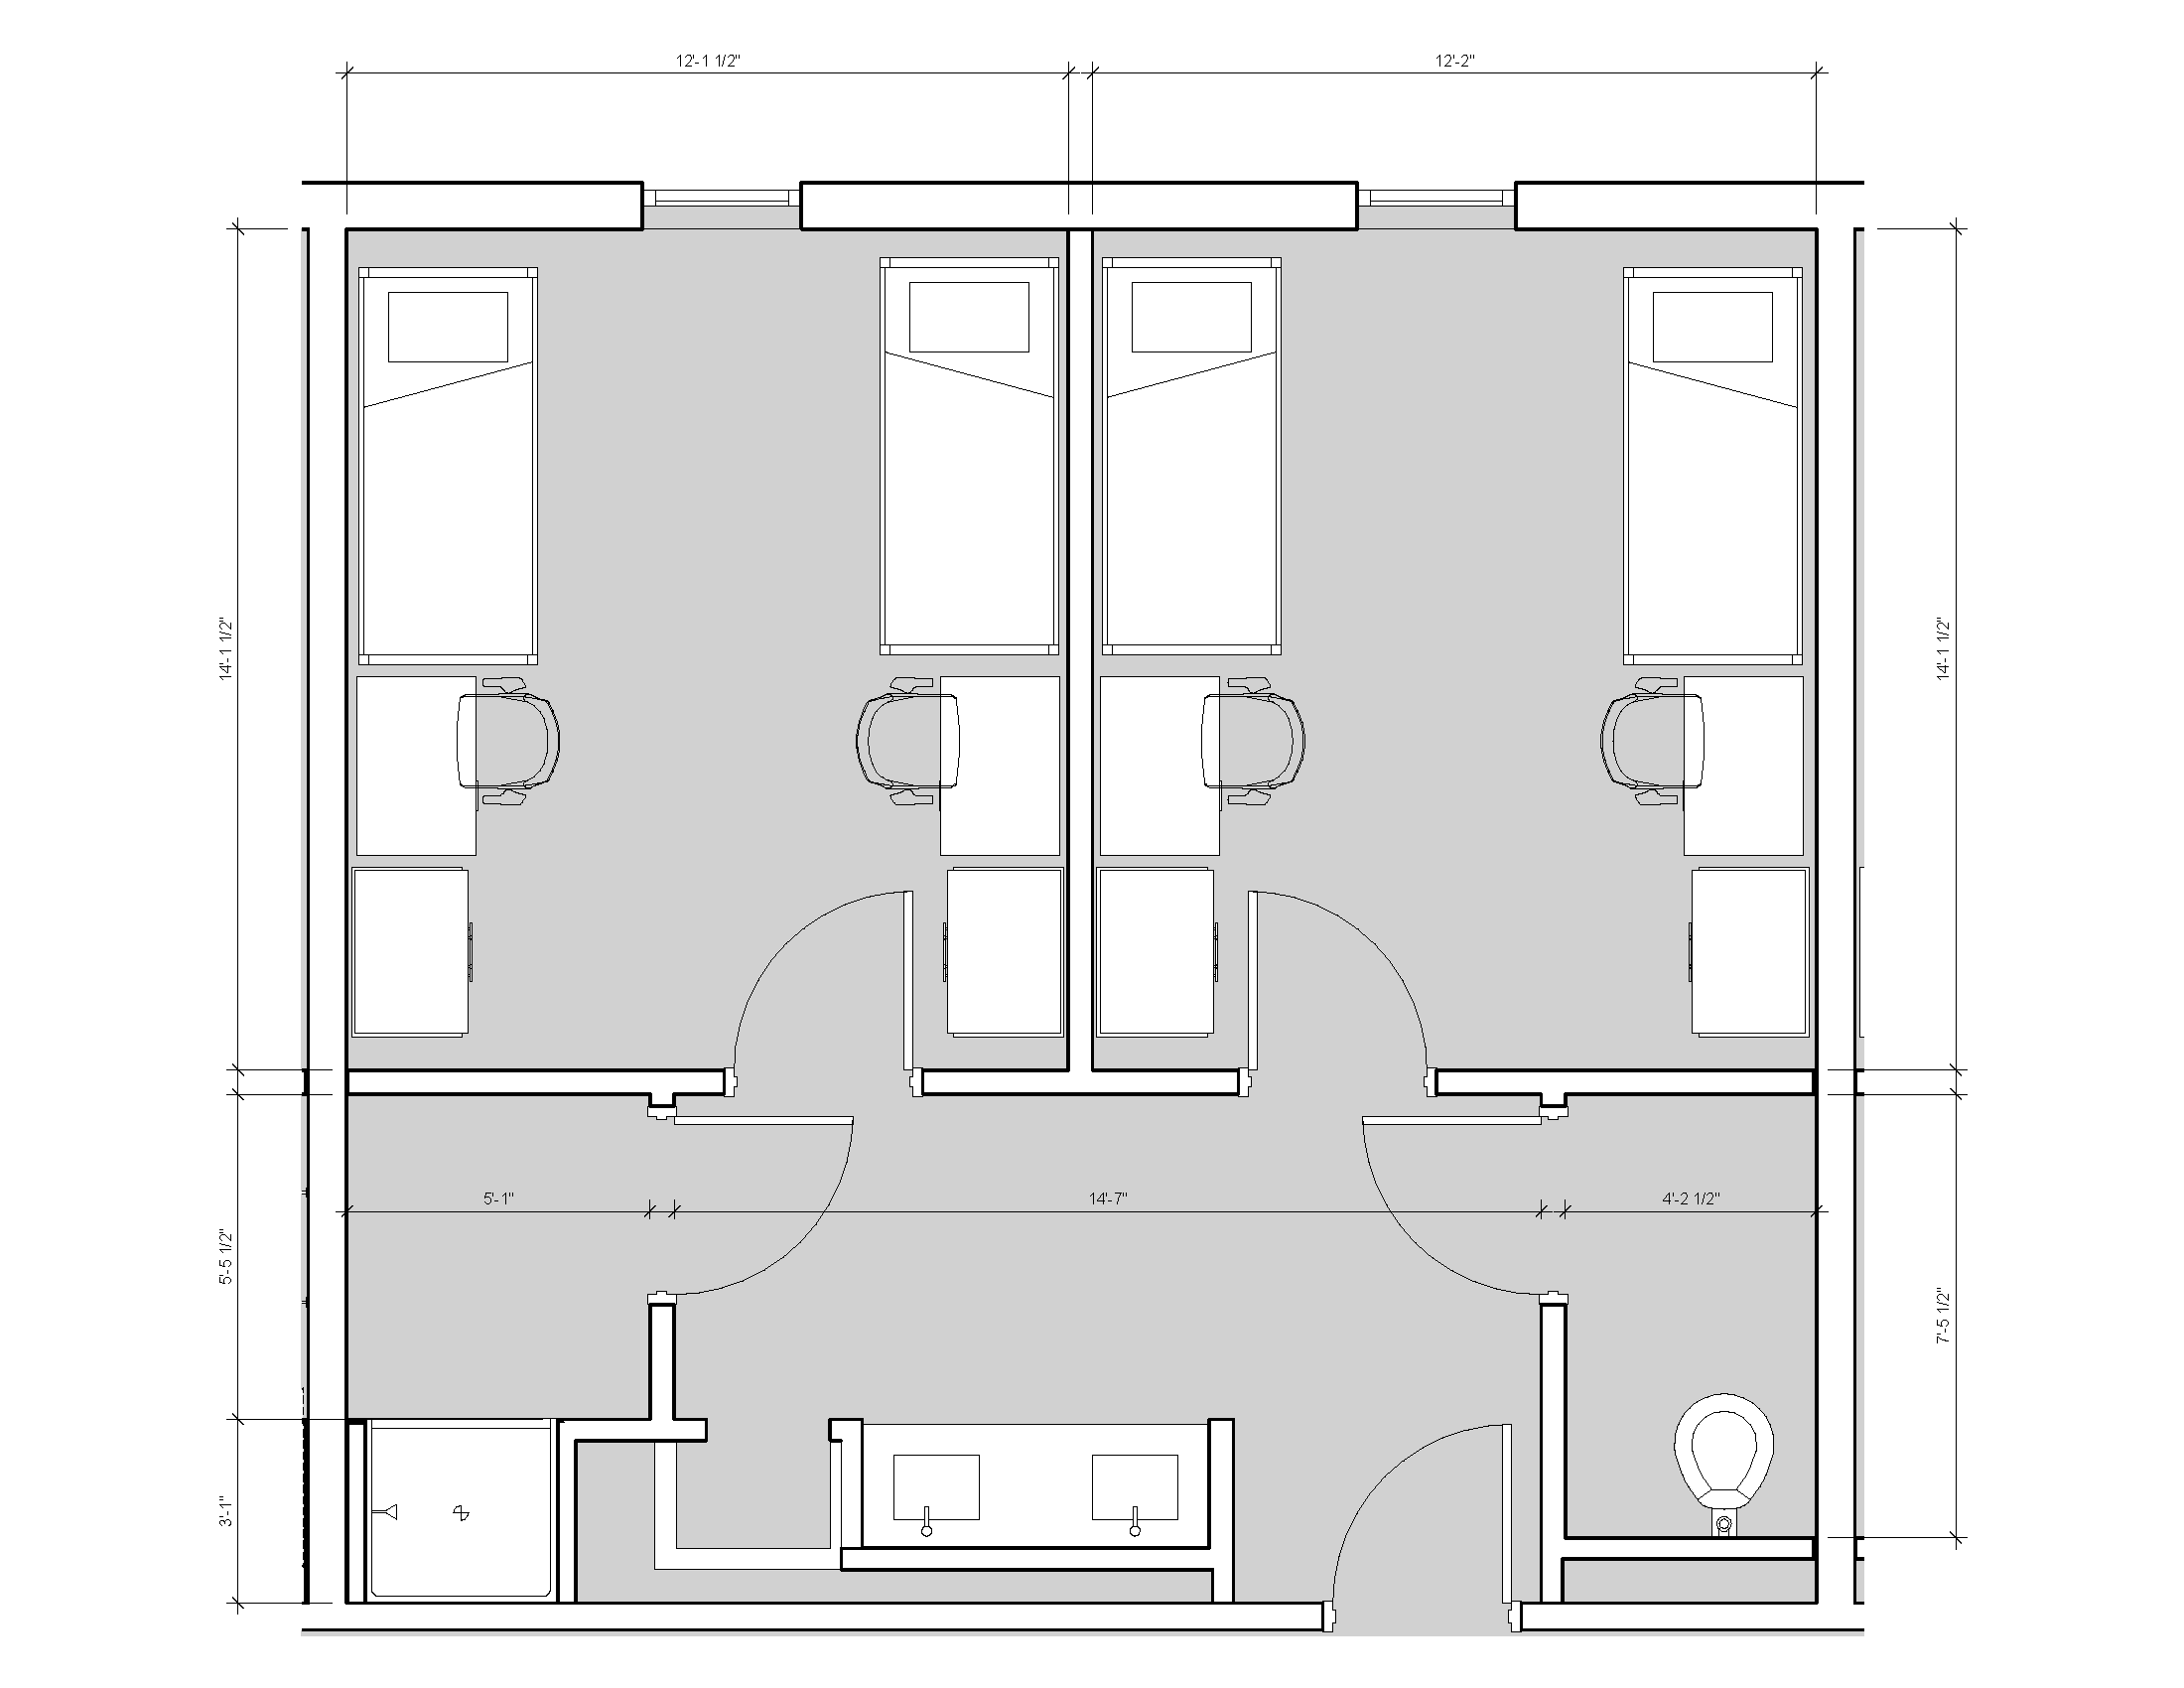 Double suite for New Residence Hall